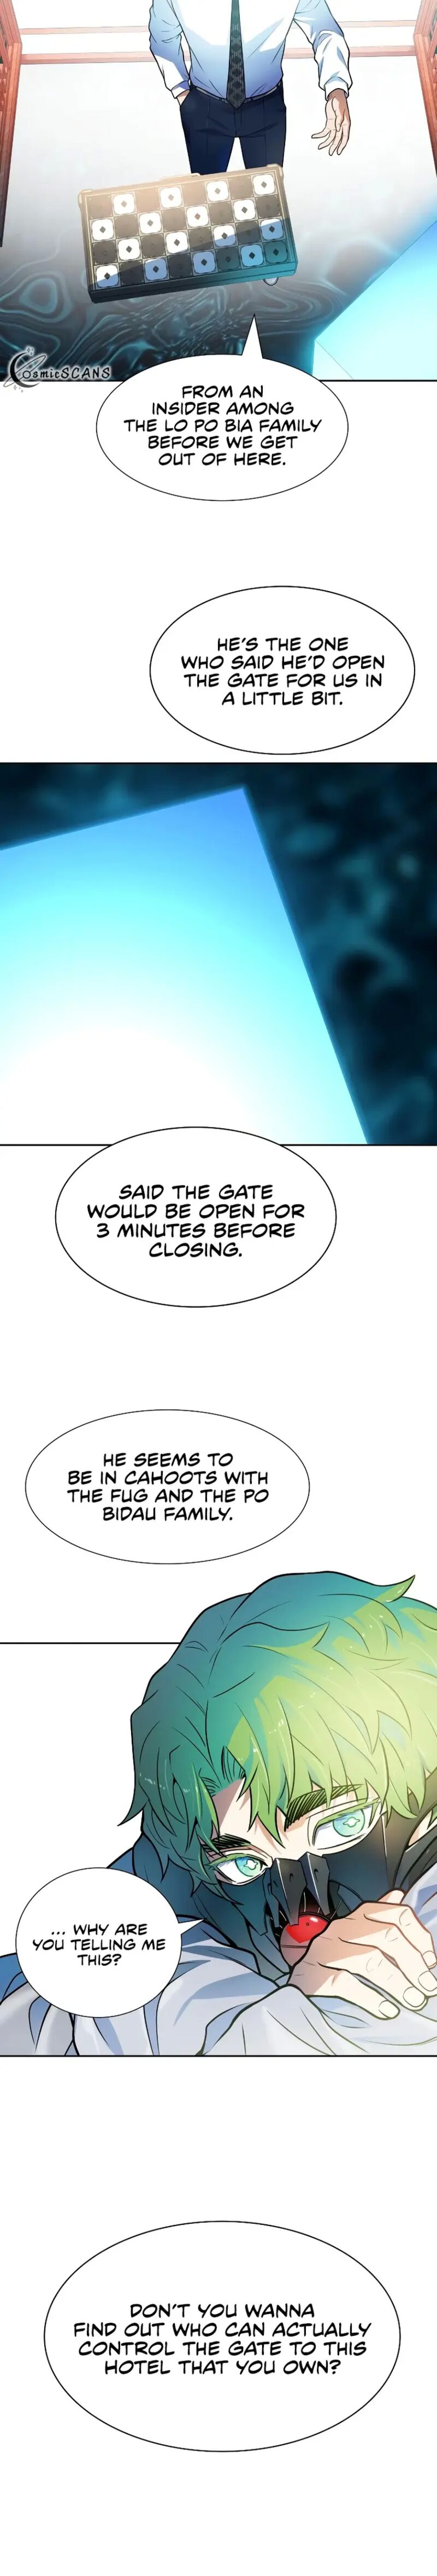 Tower Of God Chapter 572 Page 8